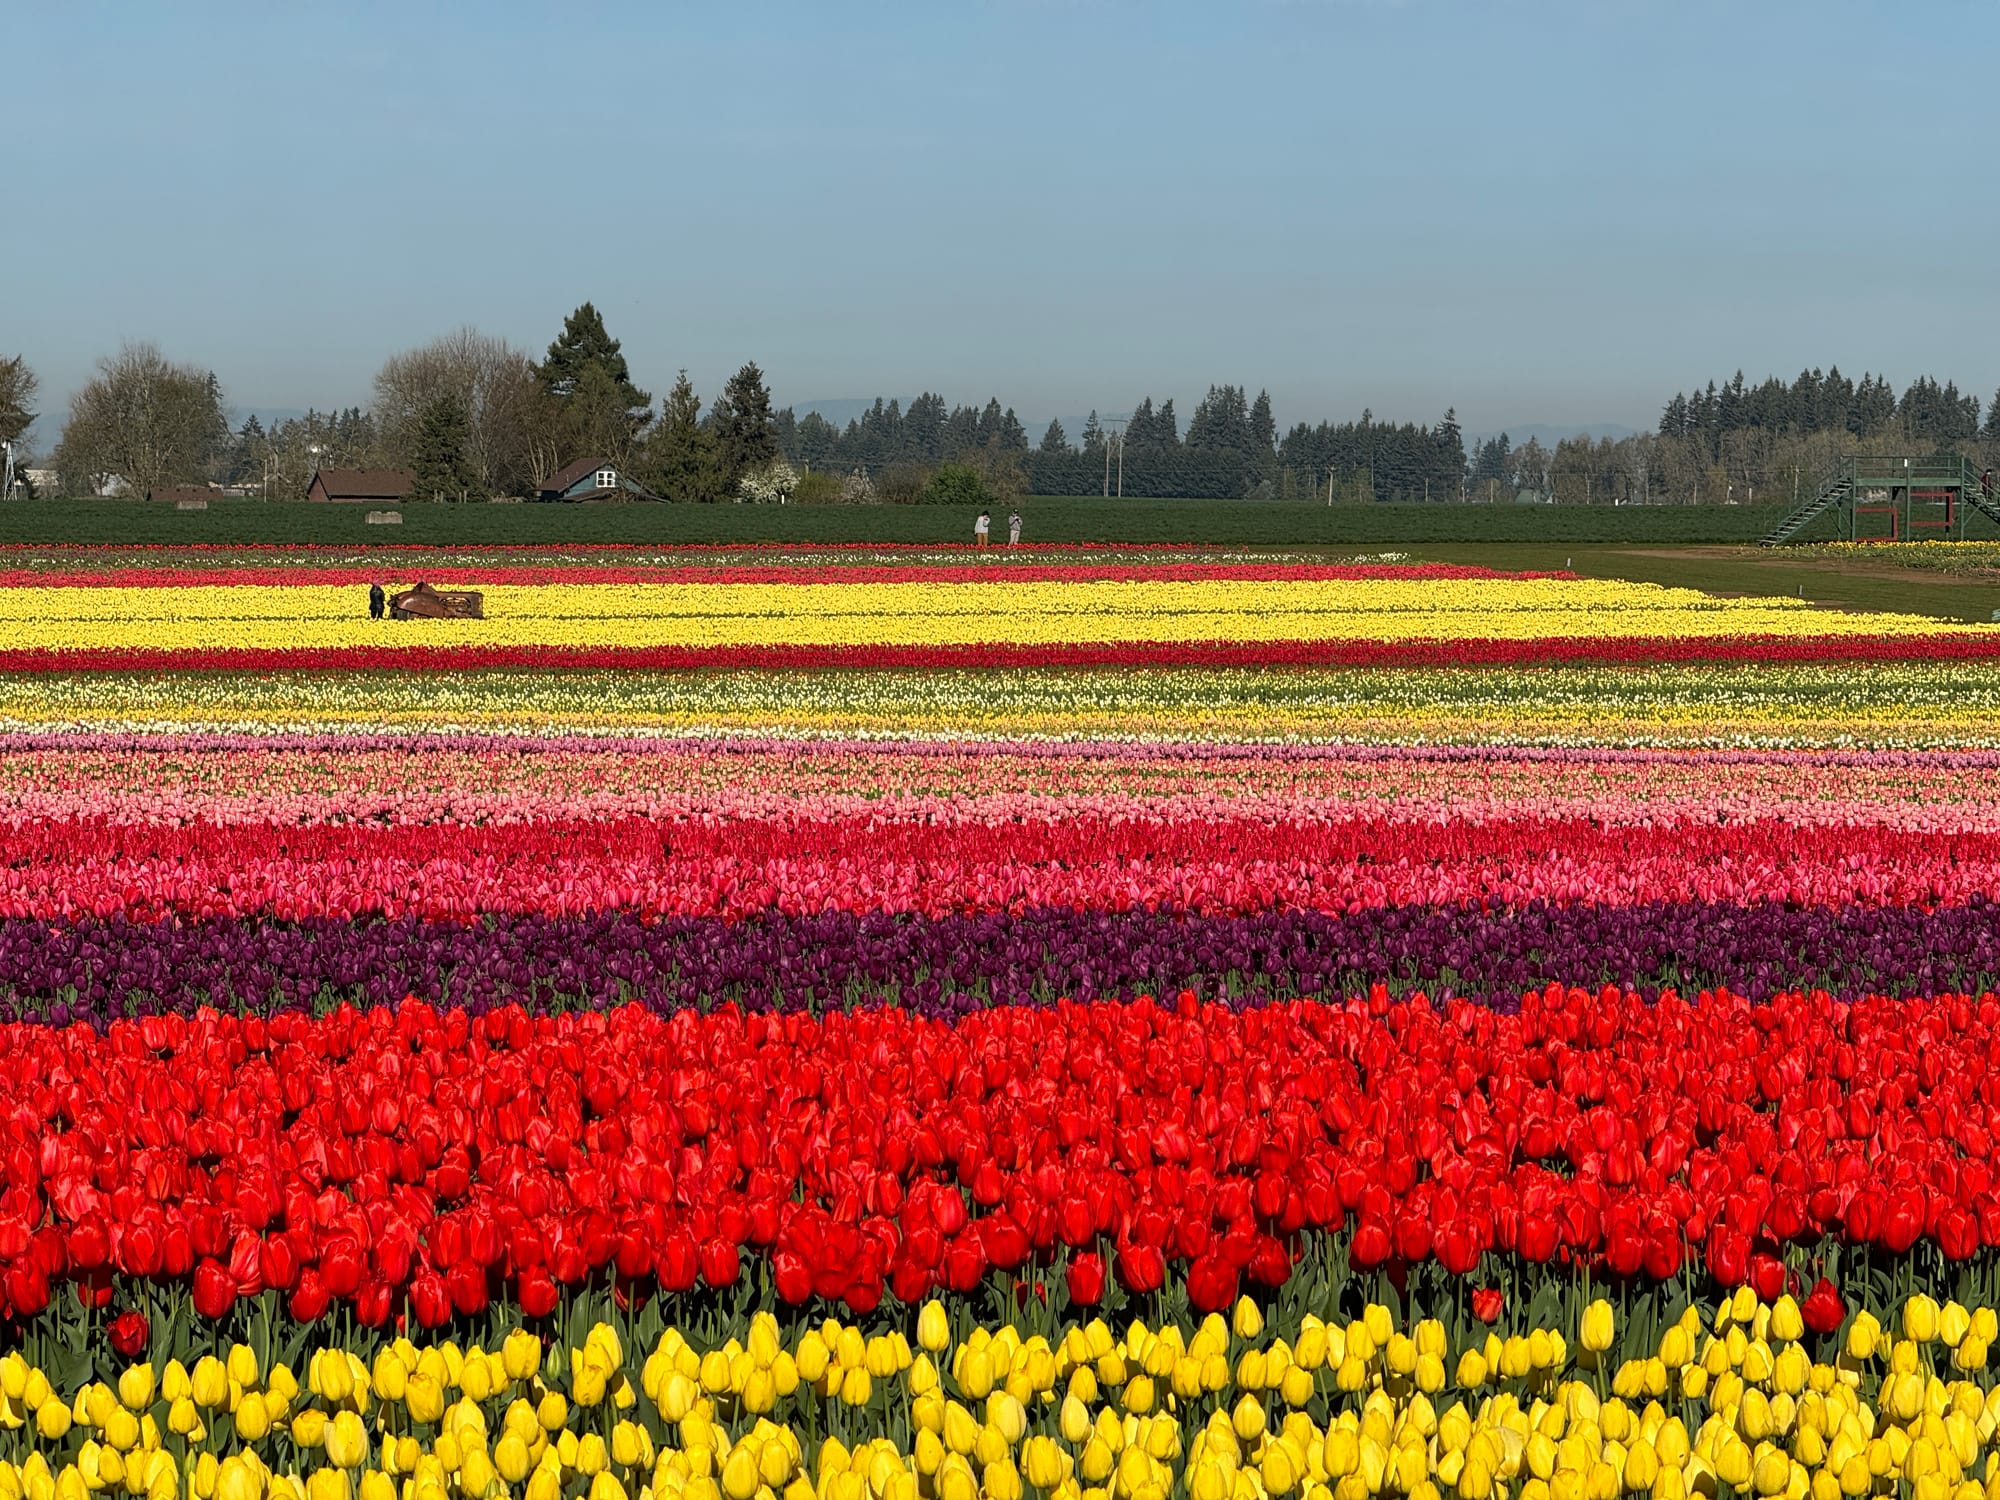 The annual visit to the Woodburn Tulip Farm